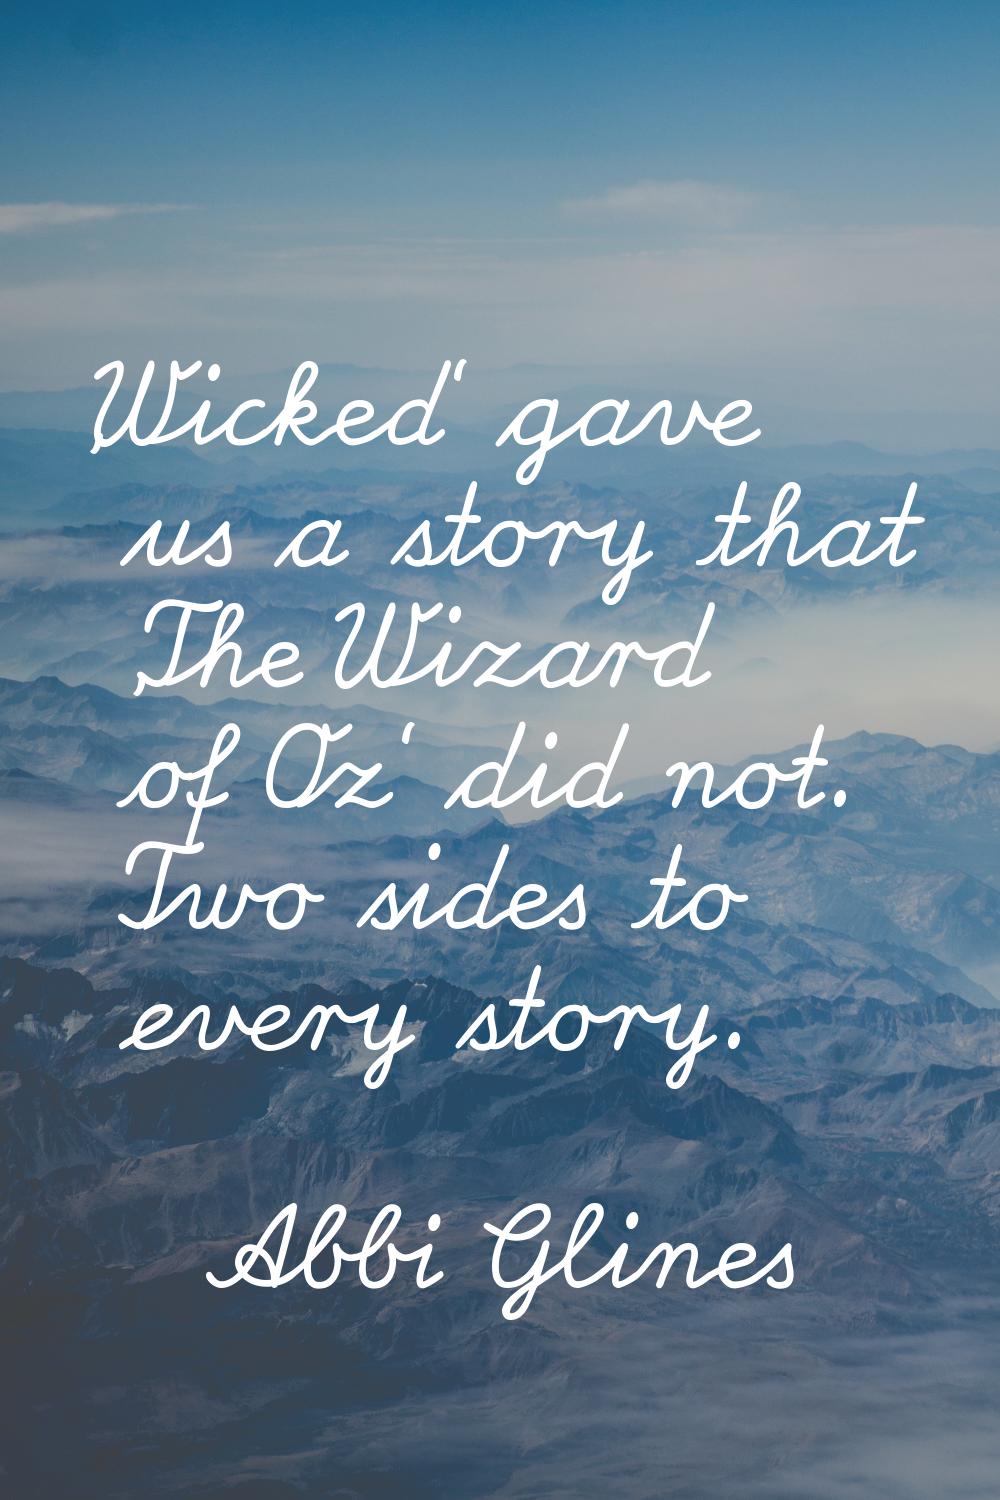 'Wicked' gave us a story that 'The Wizard of Oz' did not. Two sides to every story.